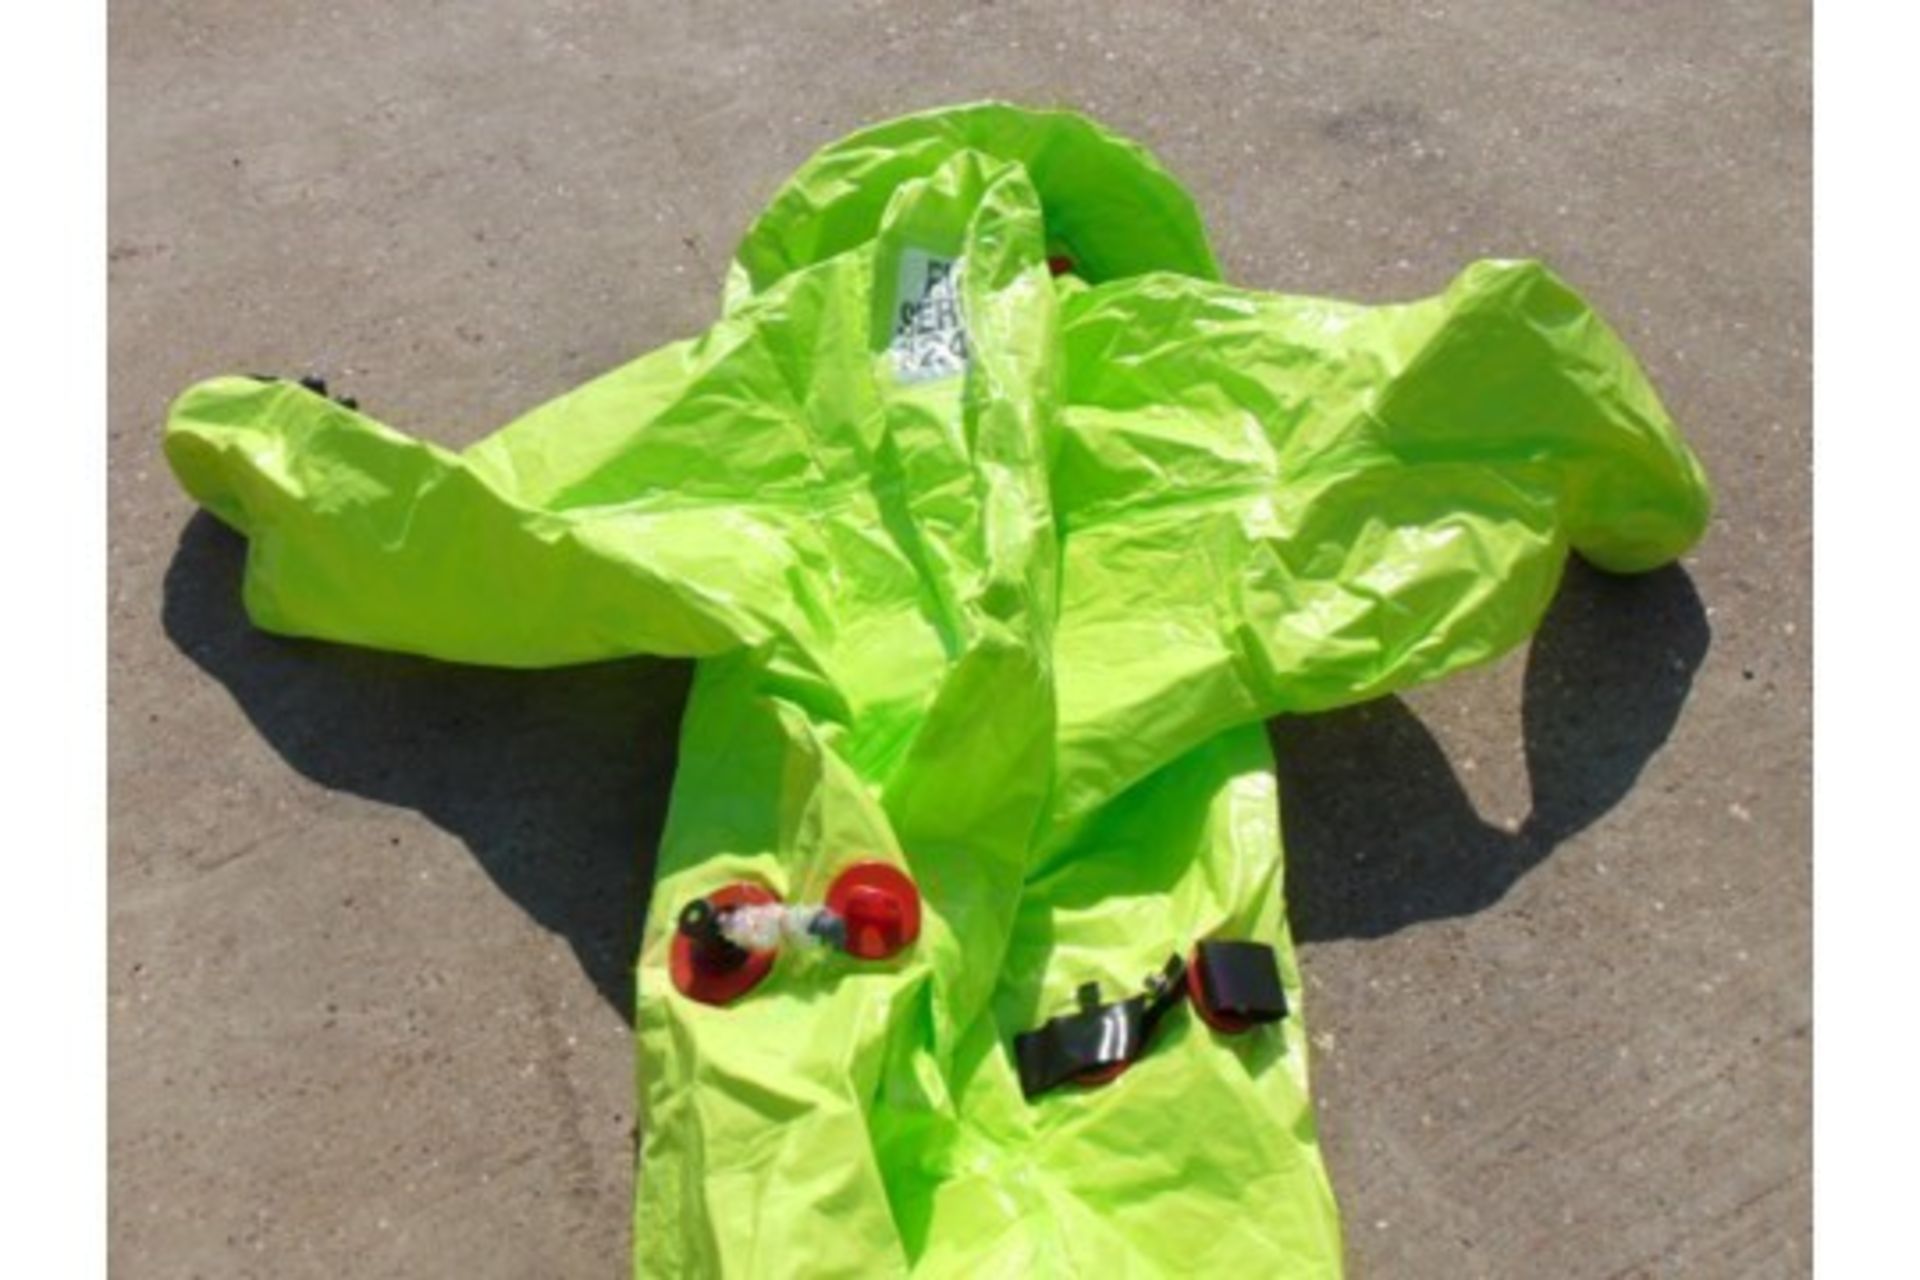 1 x Unissued Respirex Tychem TK Gas-Tight Hazmat Suit Type 1A with Attached Boots and Gloves. XLarge - Image 8 of 8